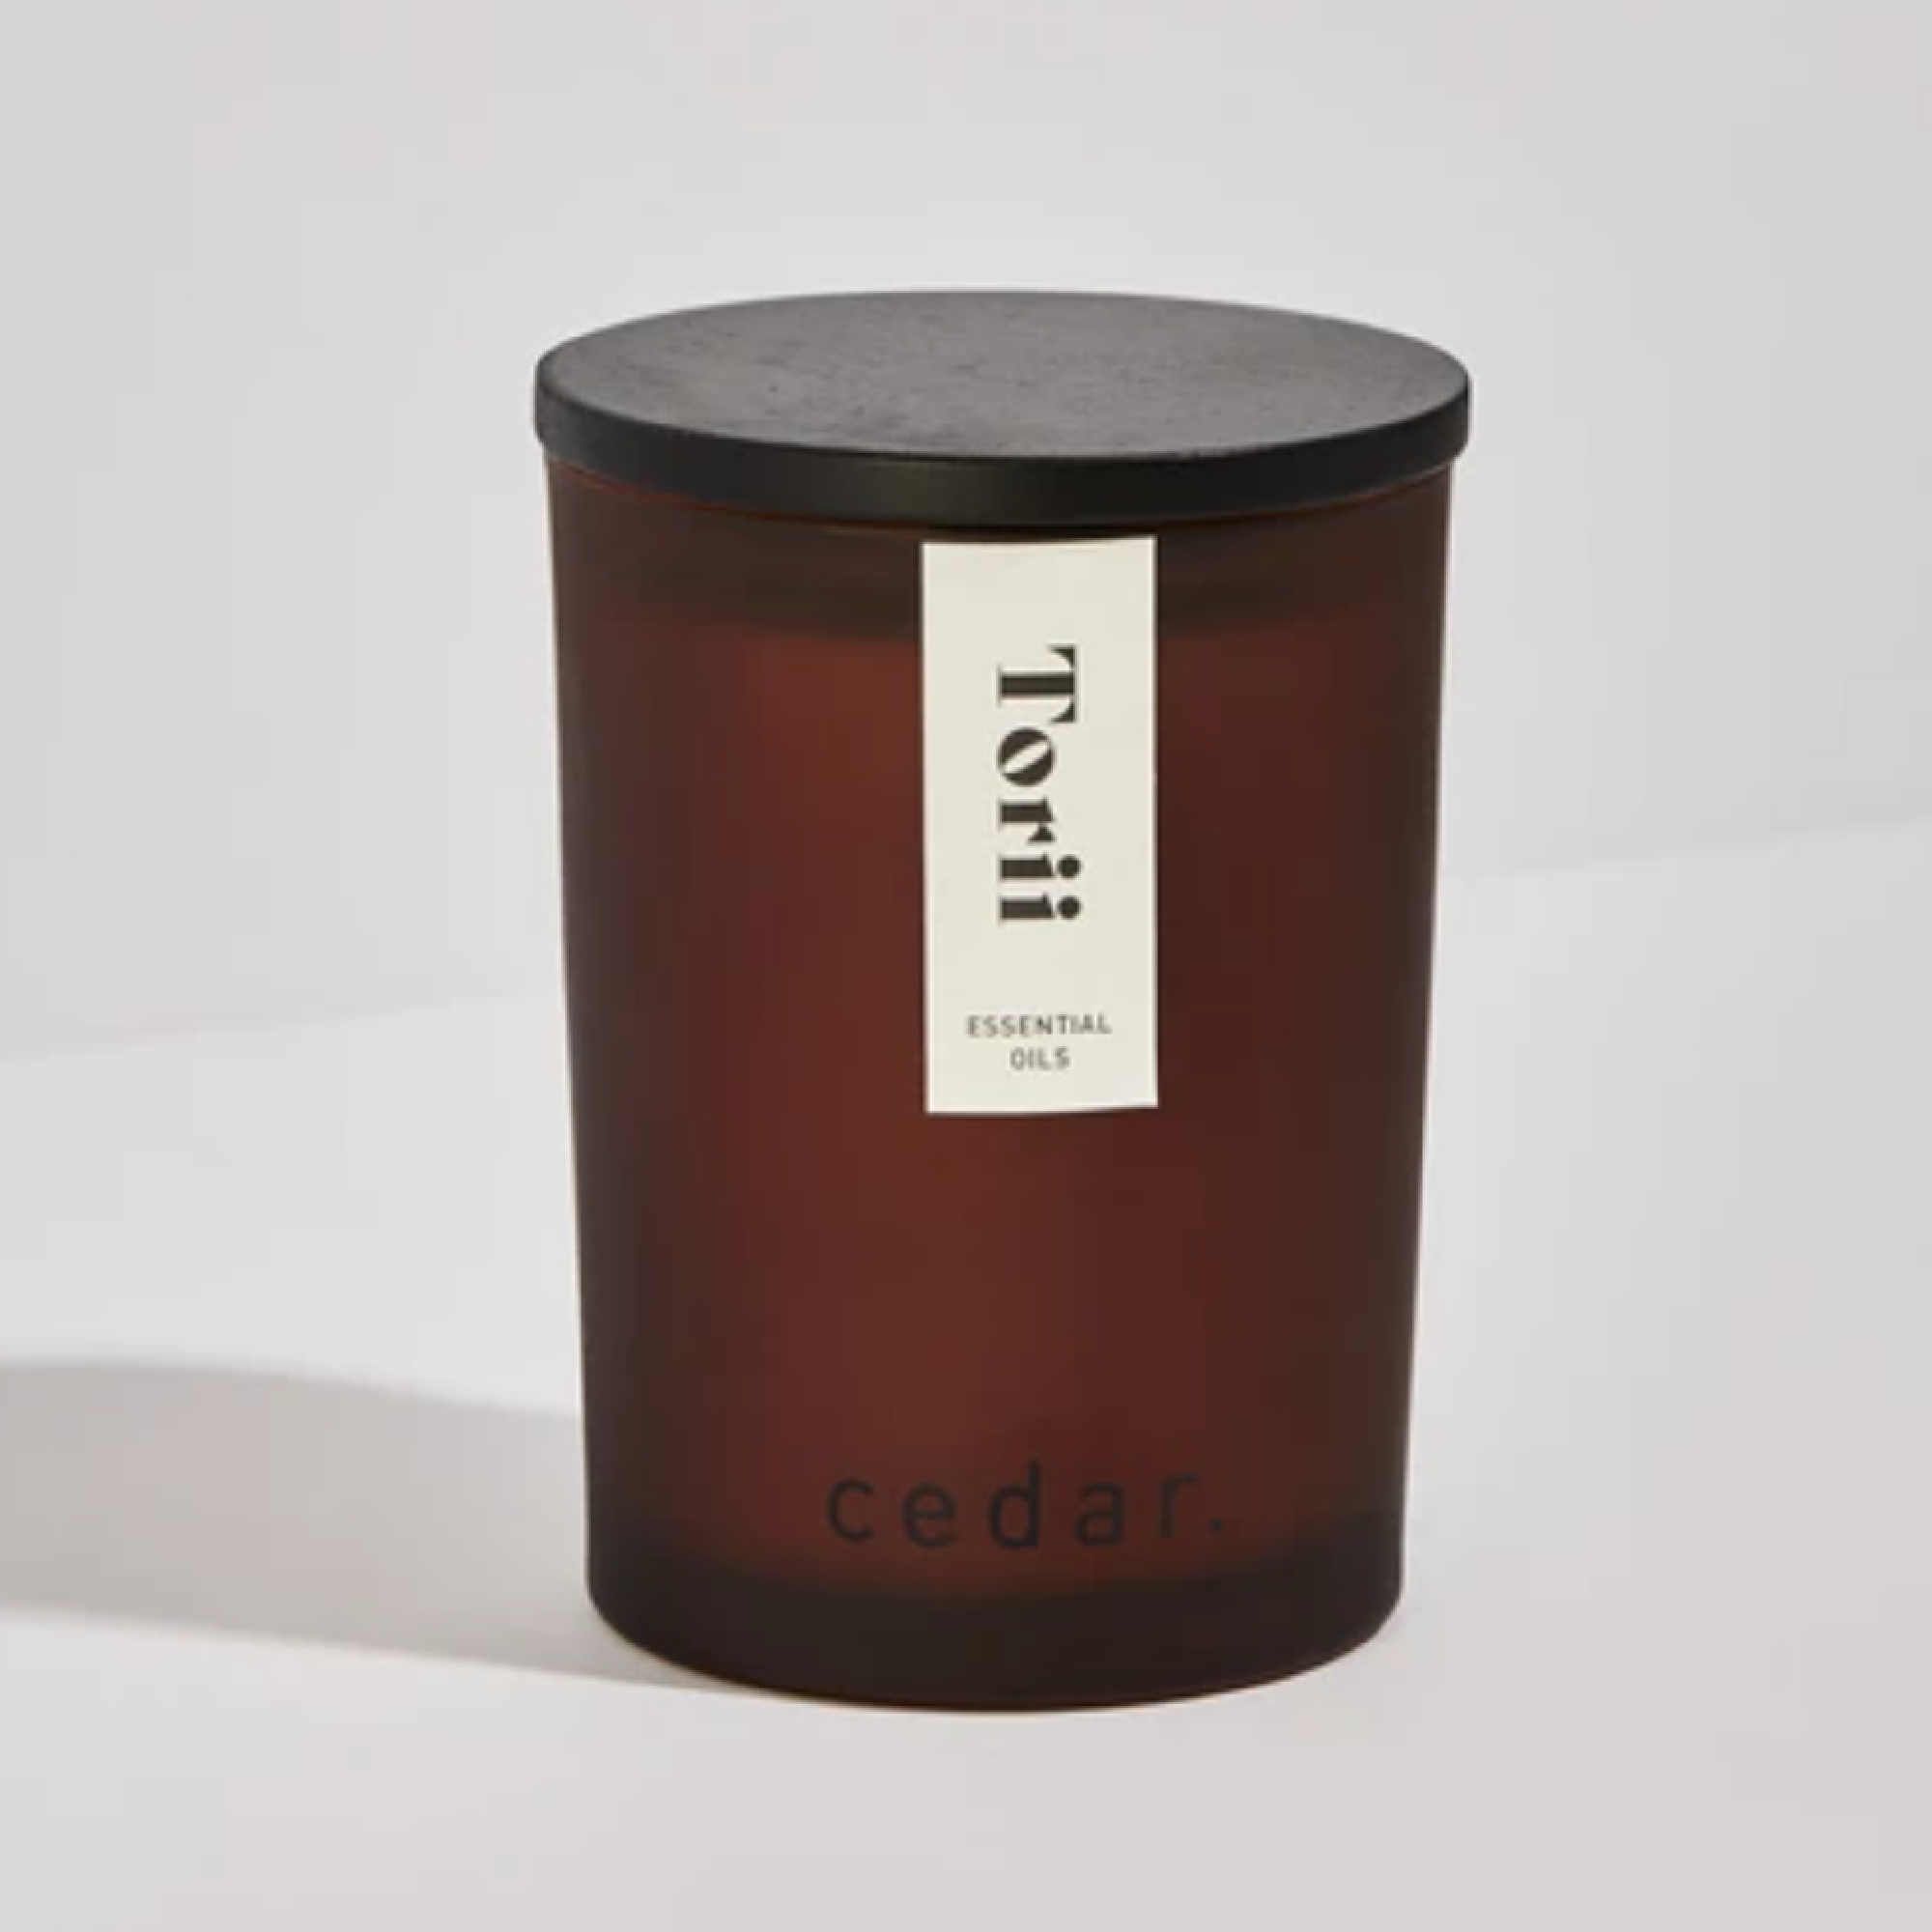 Essential Oil Candle by Cedar Lifestyle